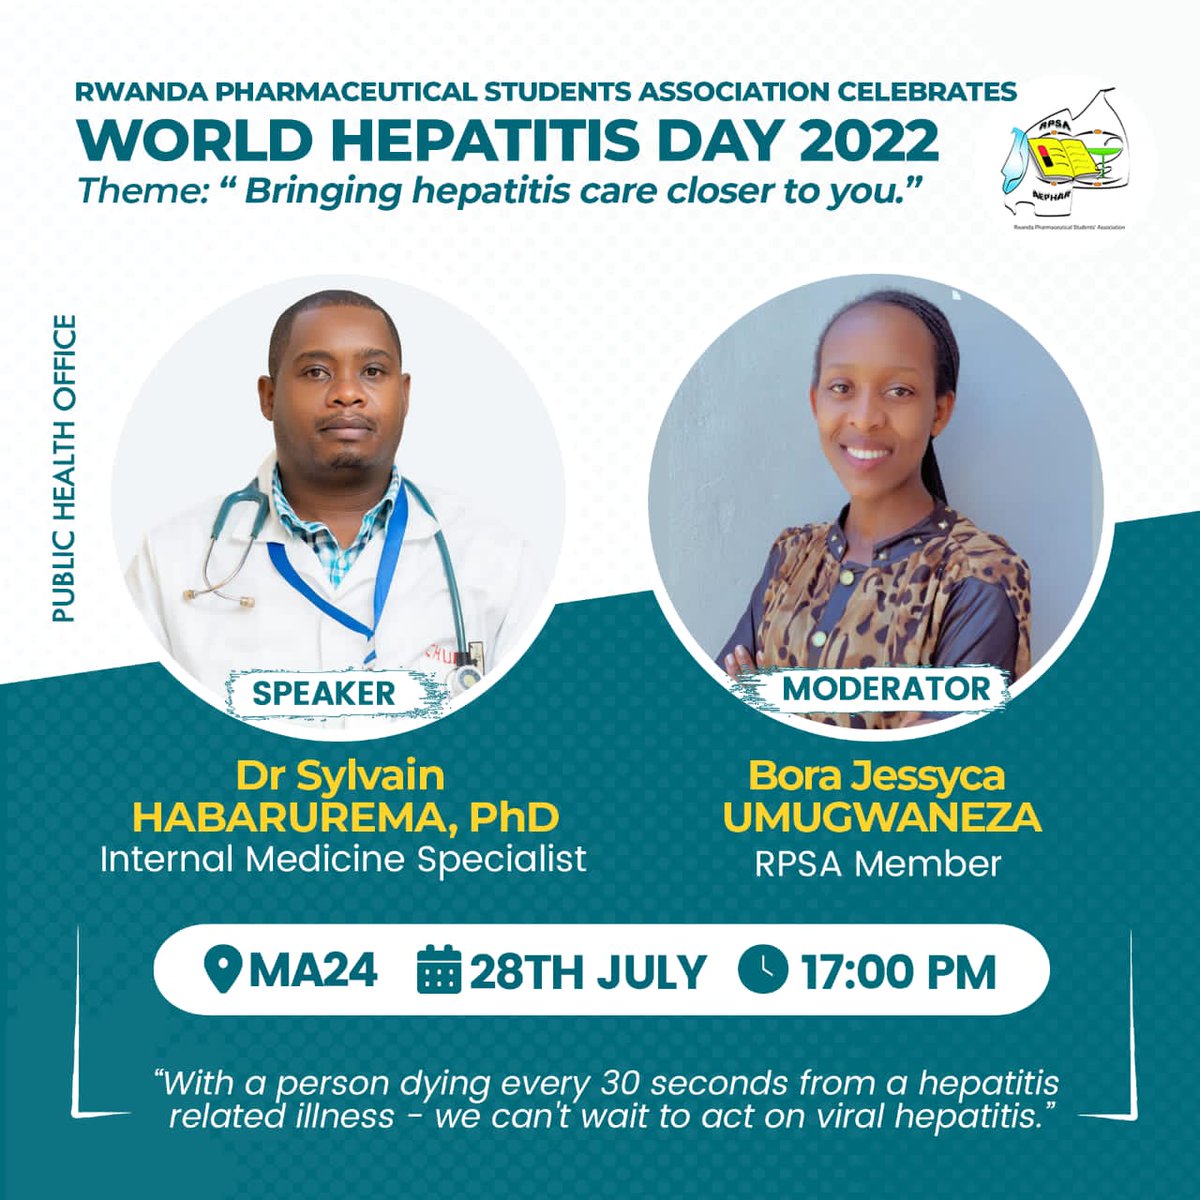 The theme of World Hepatitis Day 2022 ' Bringing hepatitis care closer to you.' is a call to people to access the very convenient testing options that are available and free.

Join @RPSARwanda to address and act on Hepatitis diseases

#WorldHepatitisDay2022 
#RPSATing